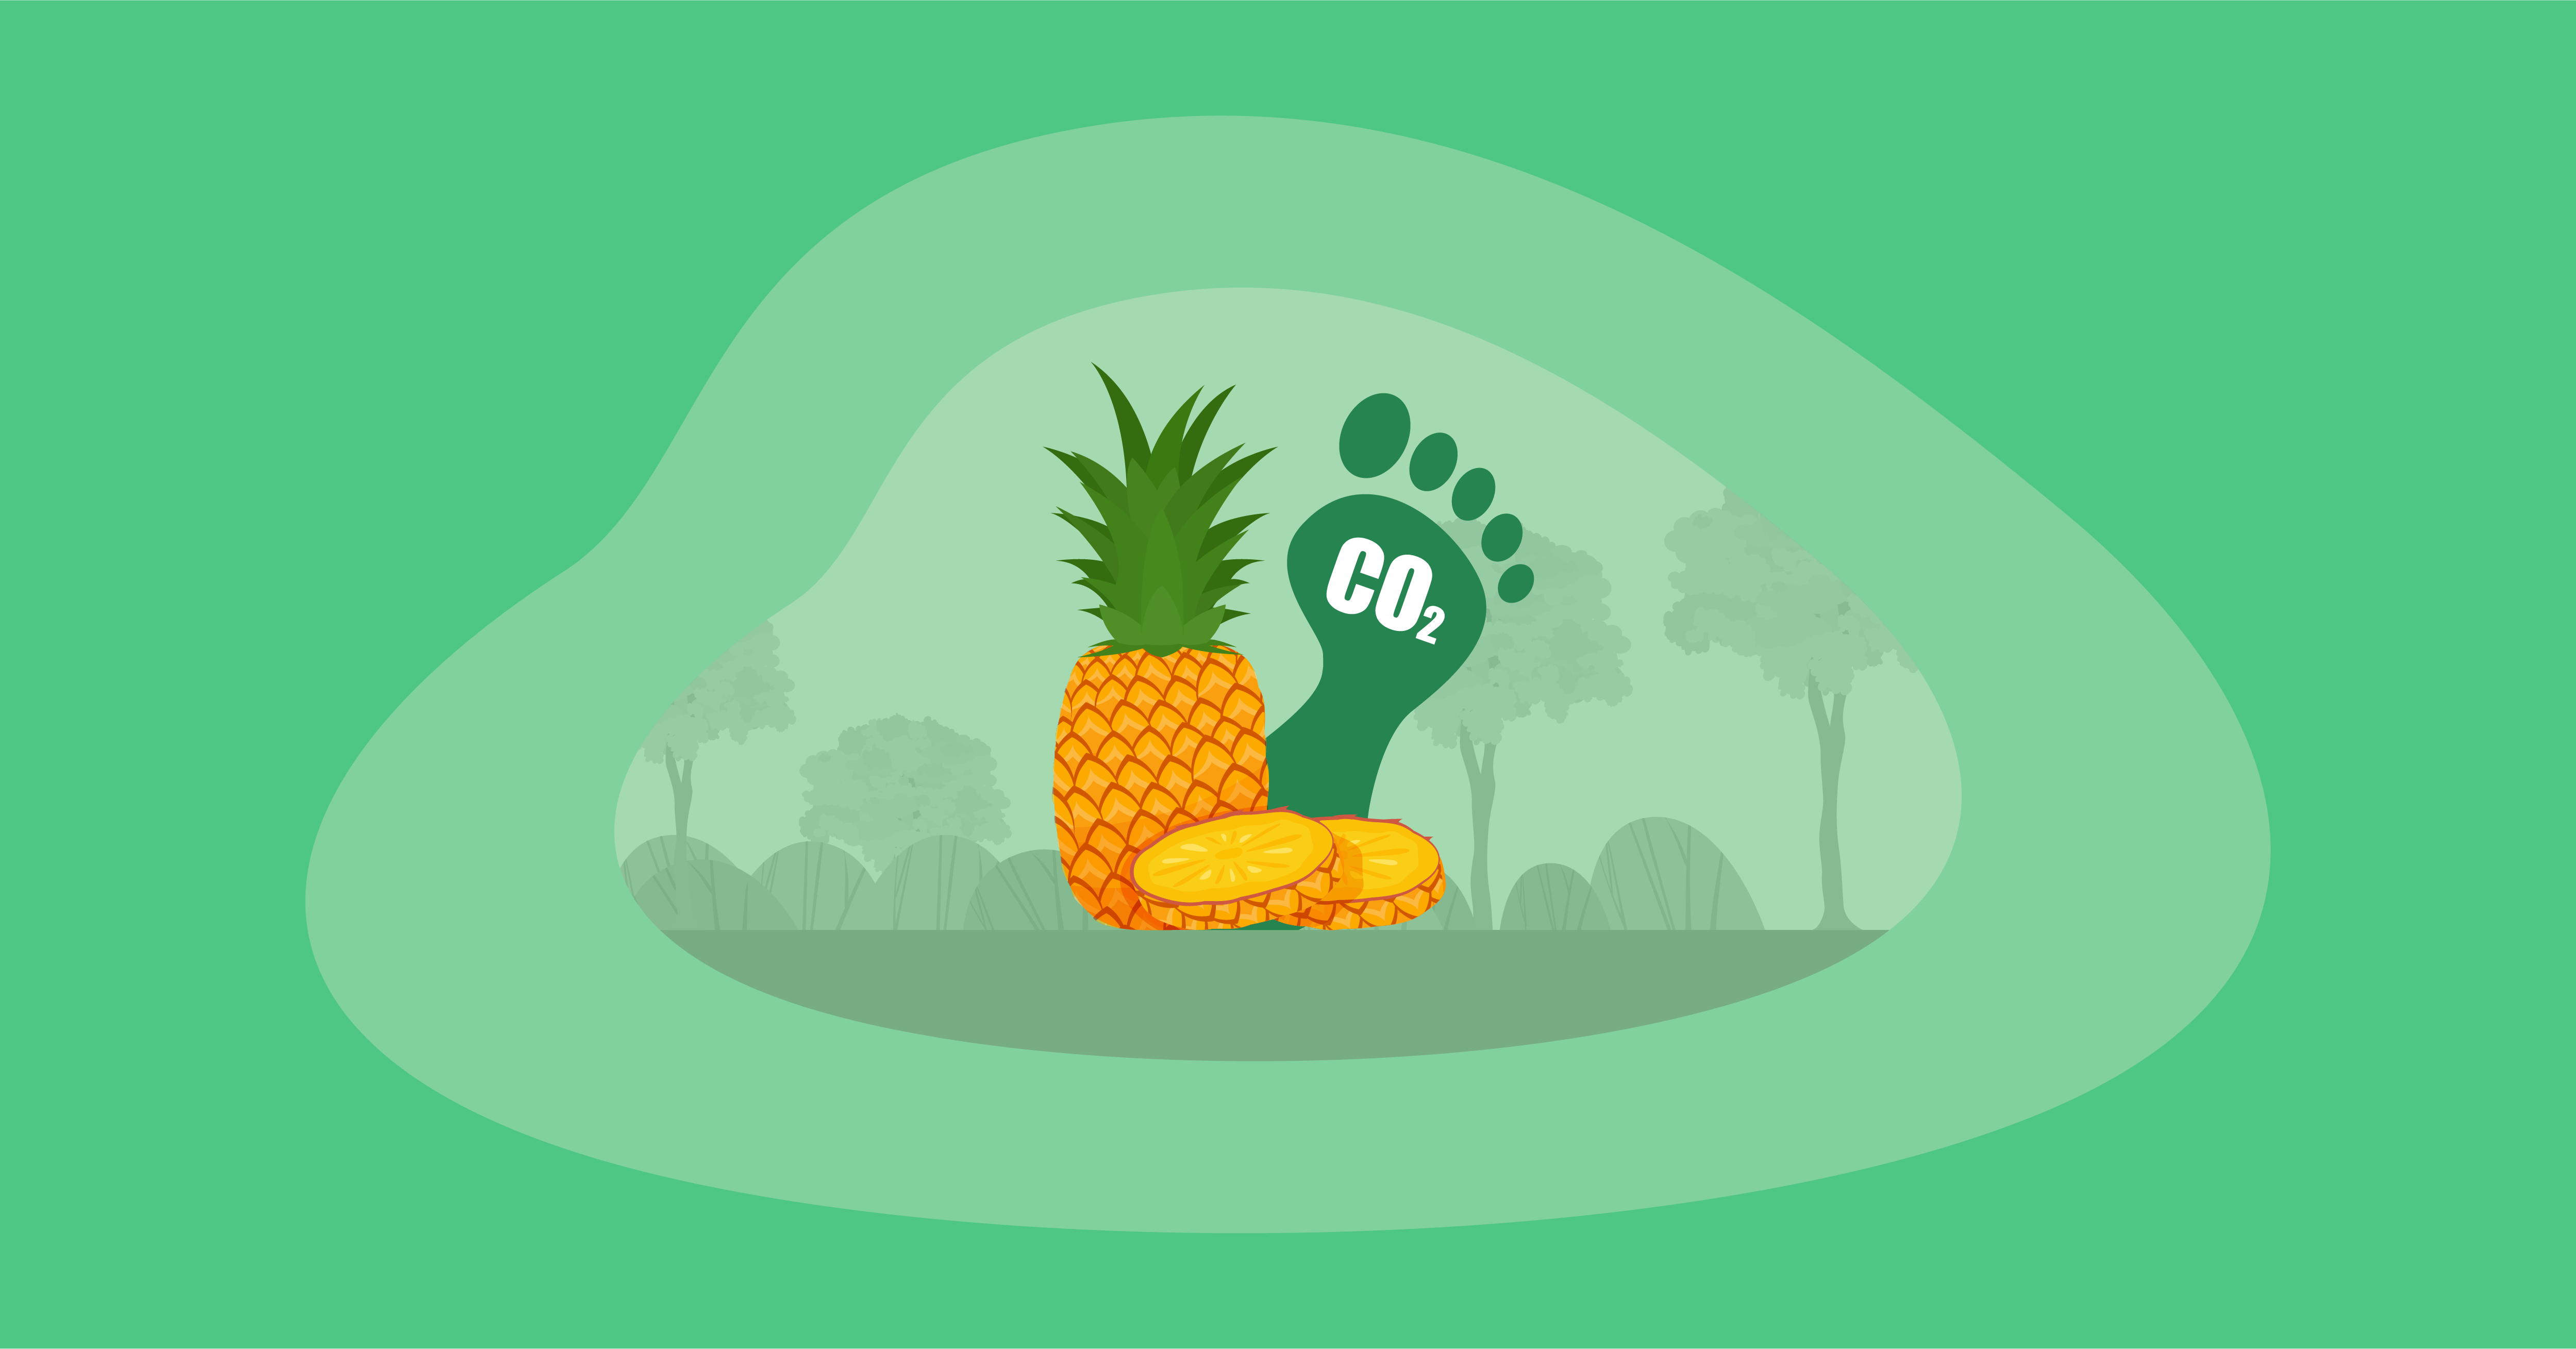 Attempted illustration of a pineapple with its carbon footprint